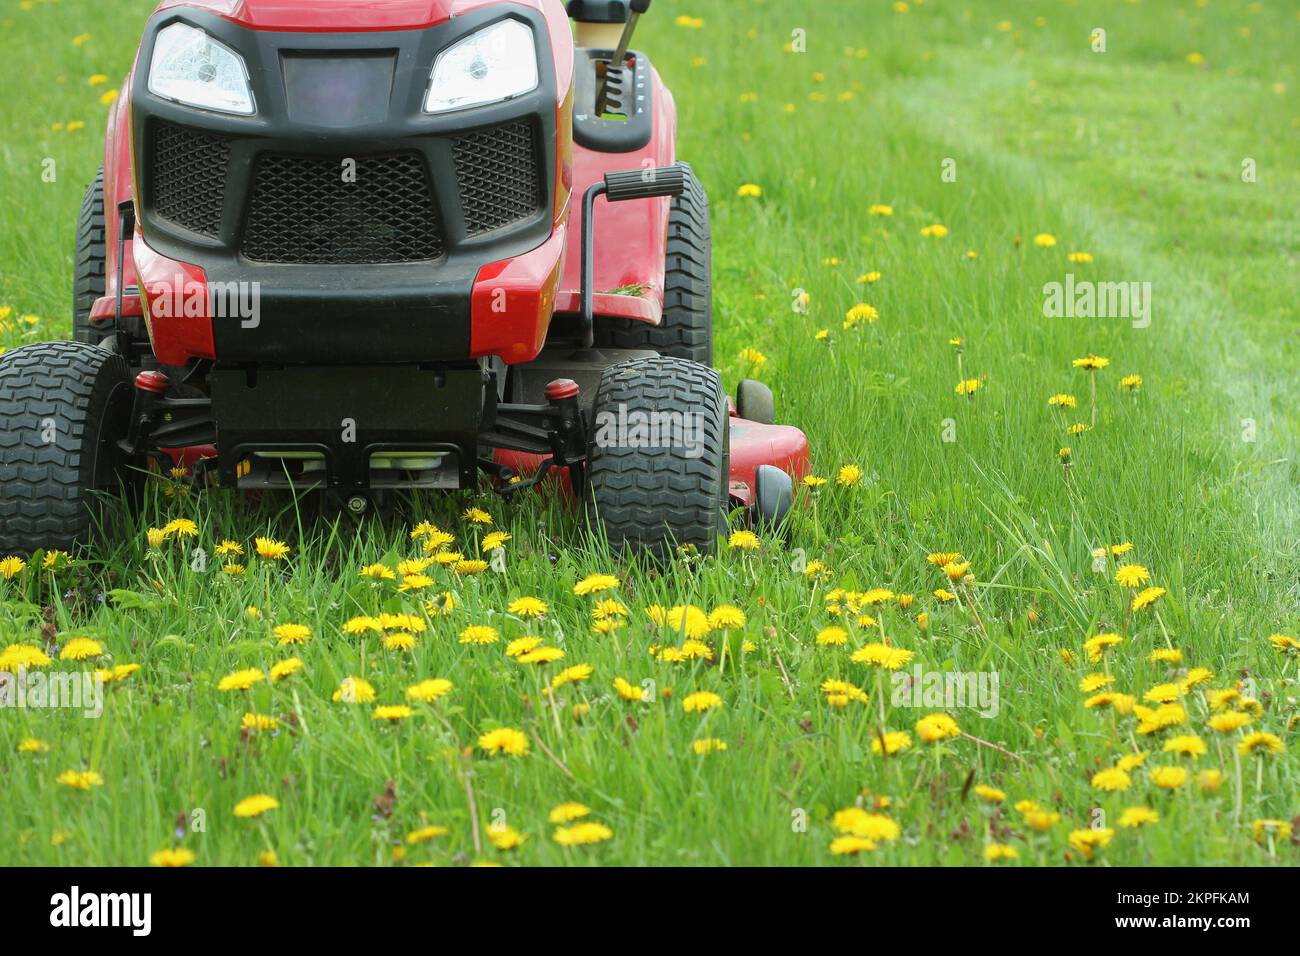 Gardening concept background. Gardener cutting the long grass on a tractor lawn mower . Stock Photo